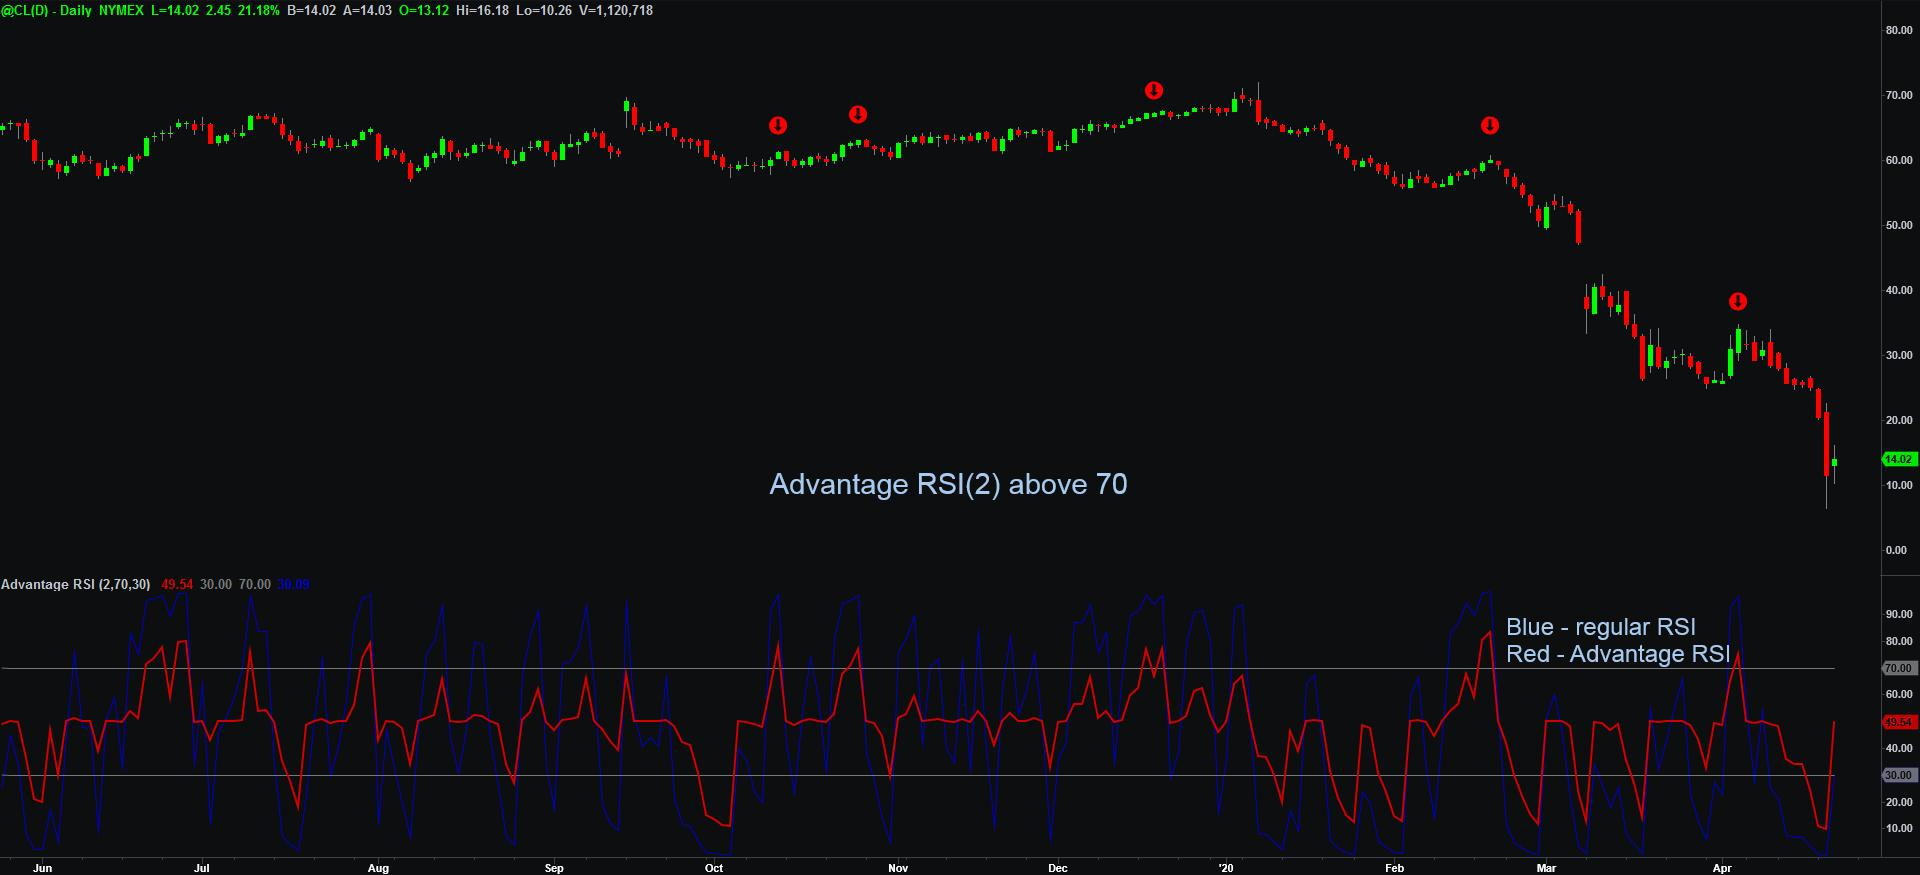 Normalized RSI